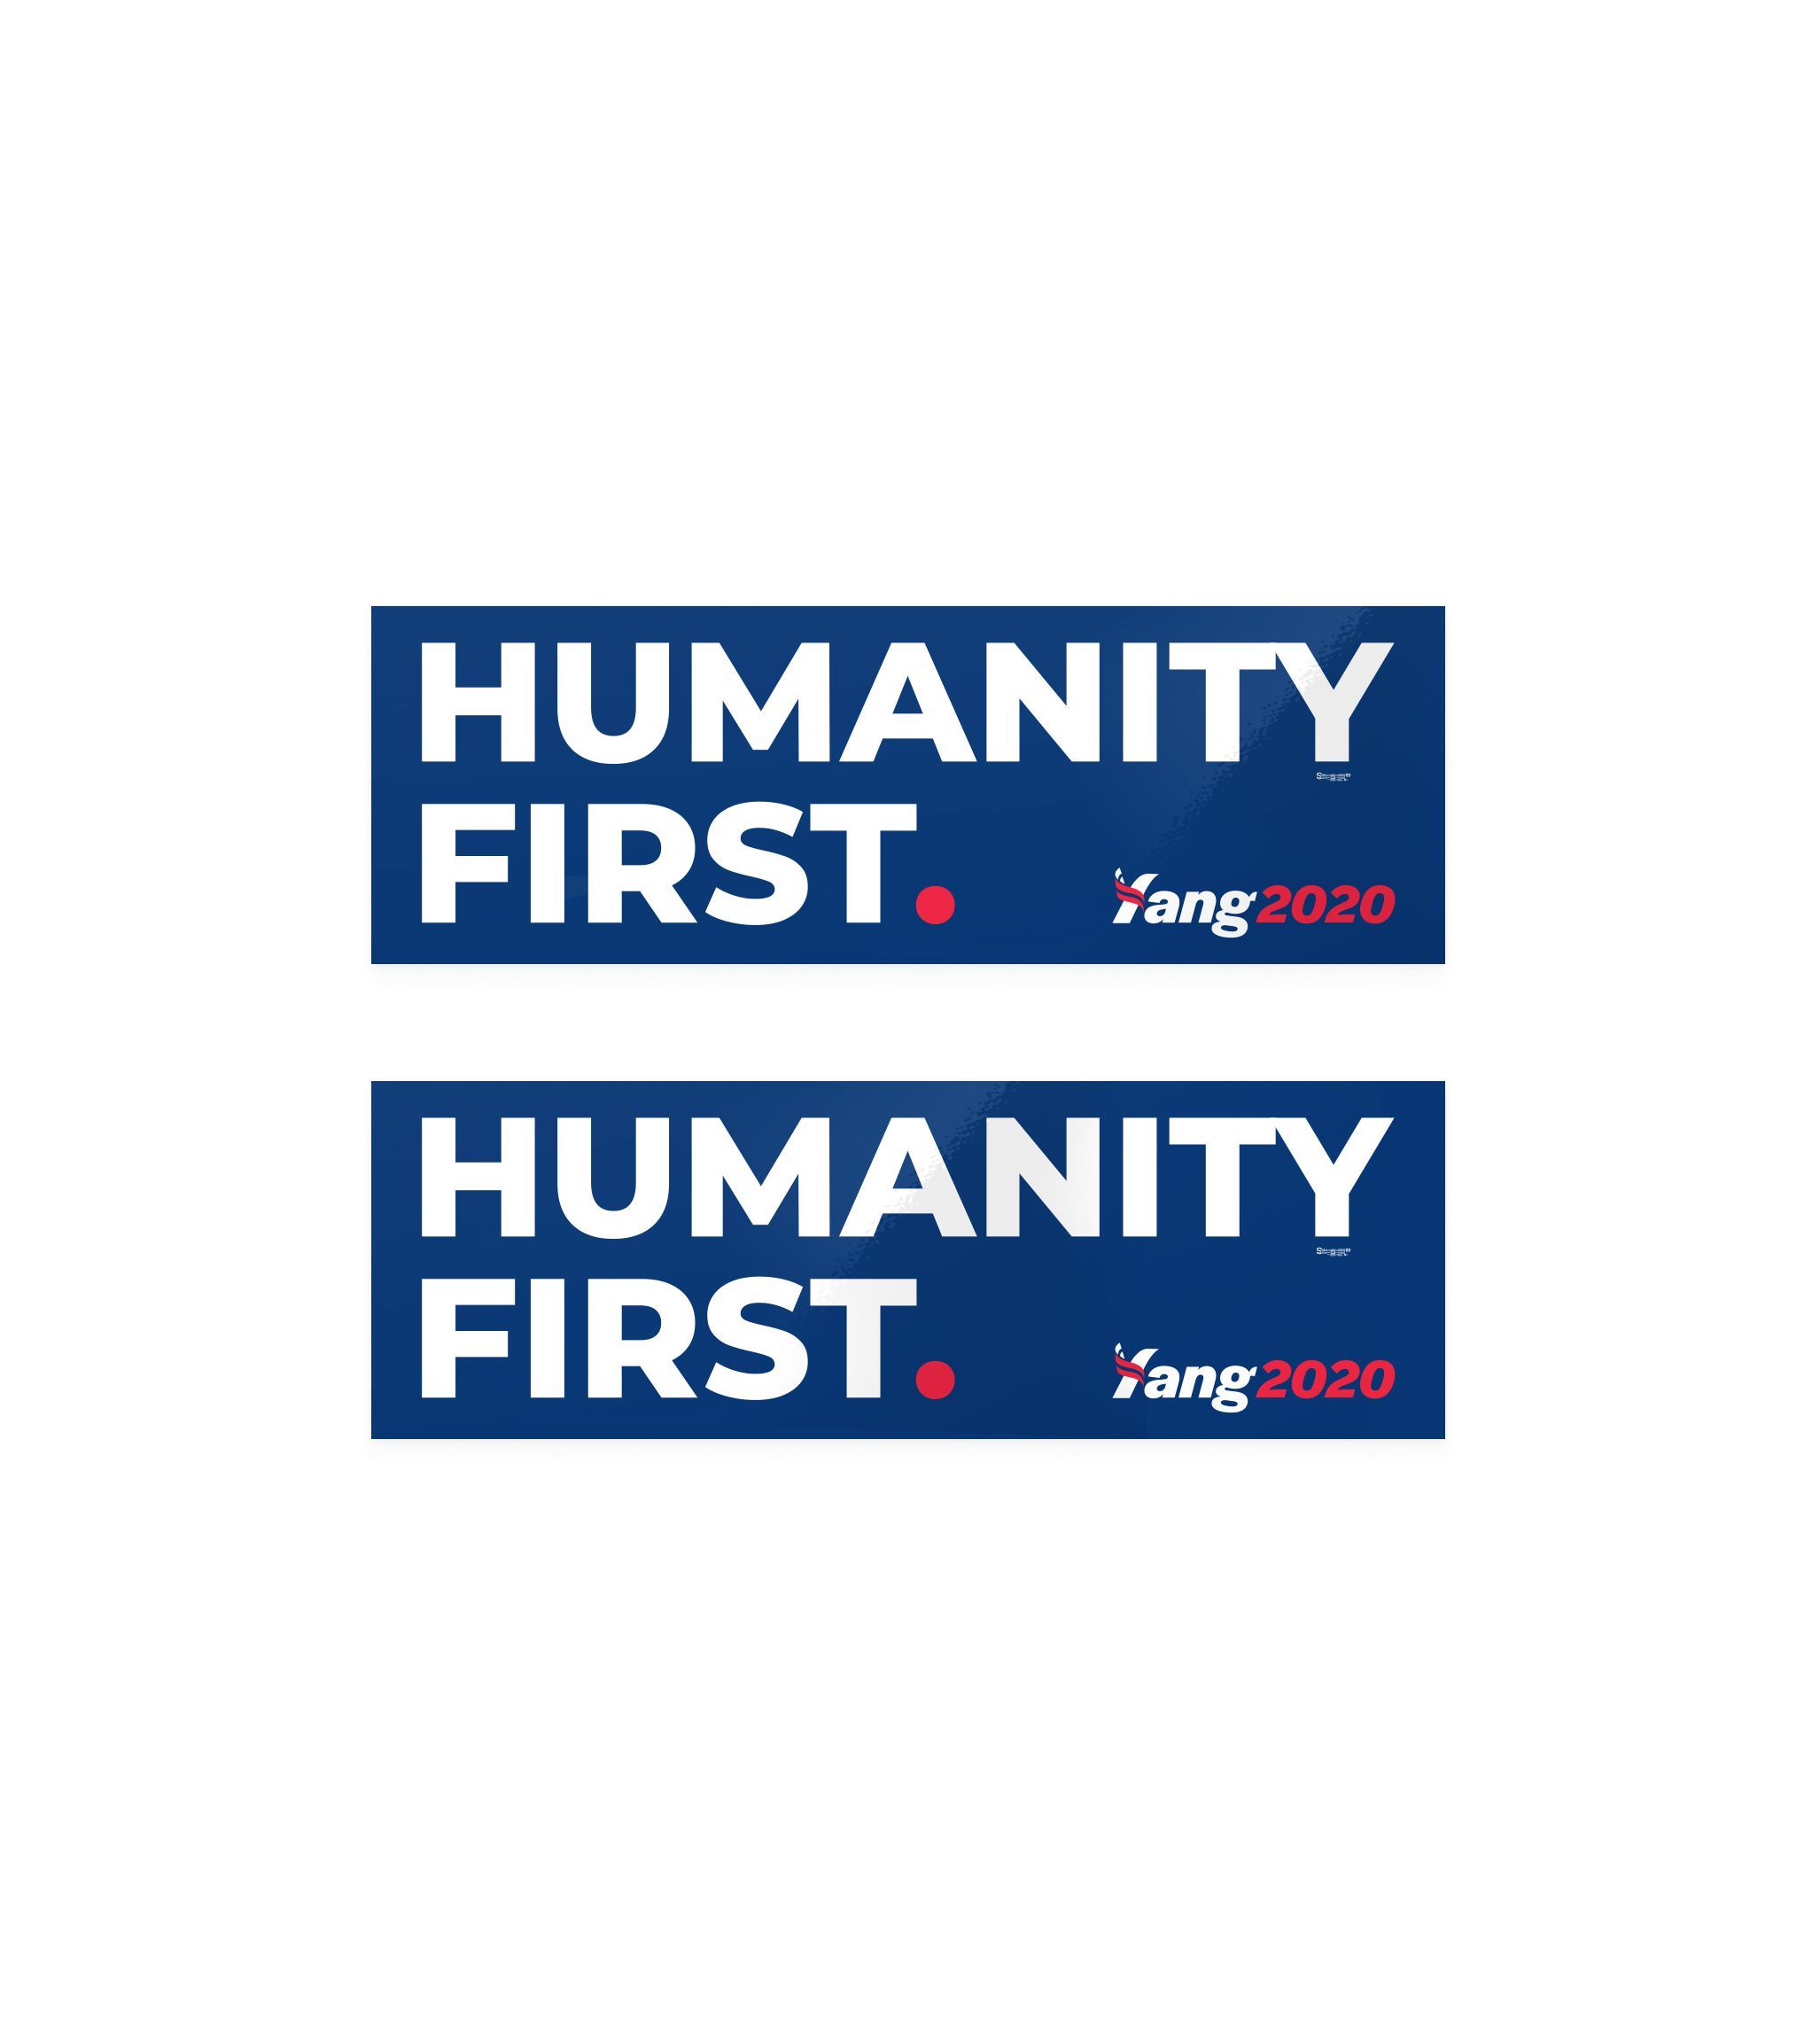 Humanity First Bumper Sticker Combo